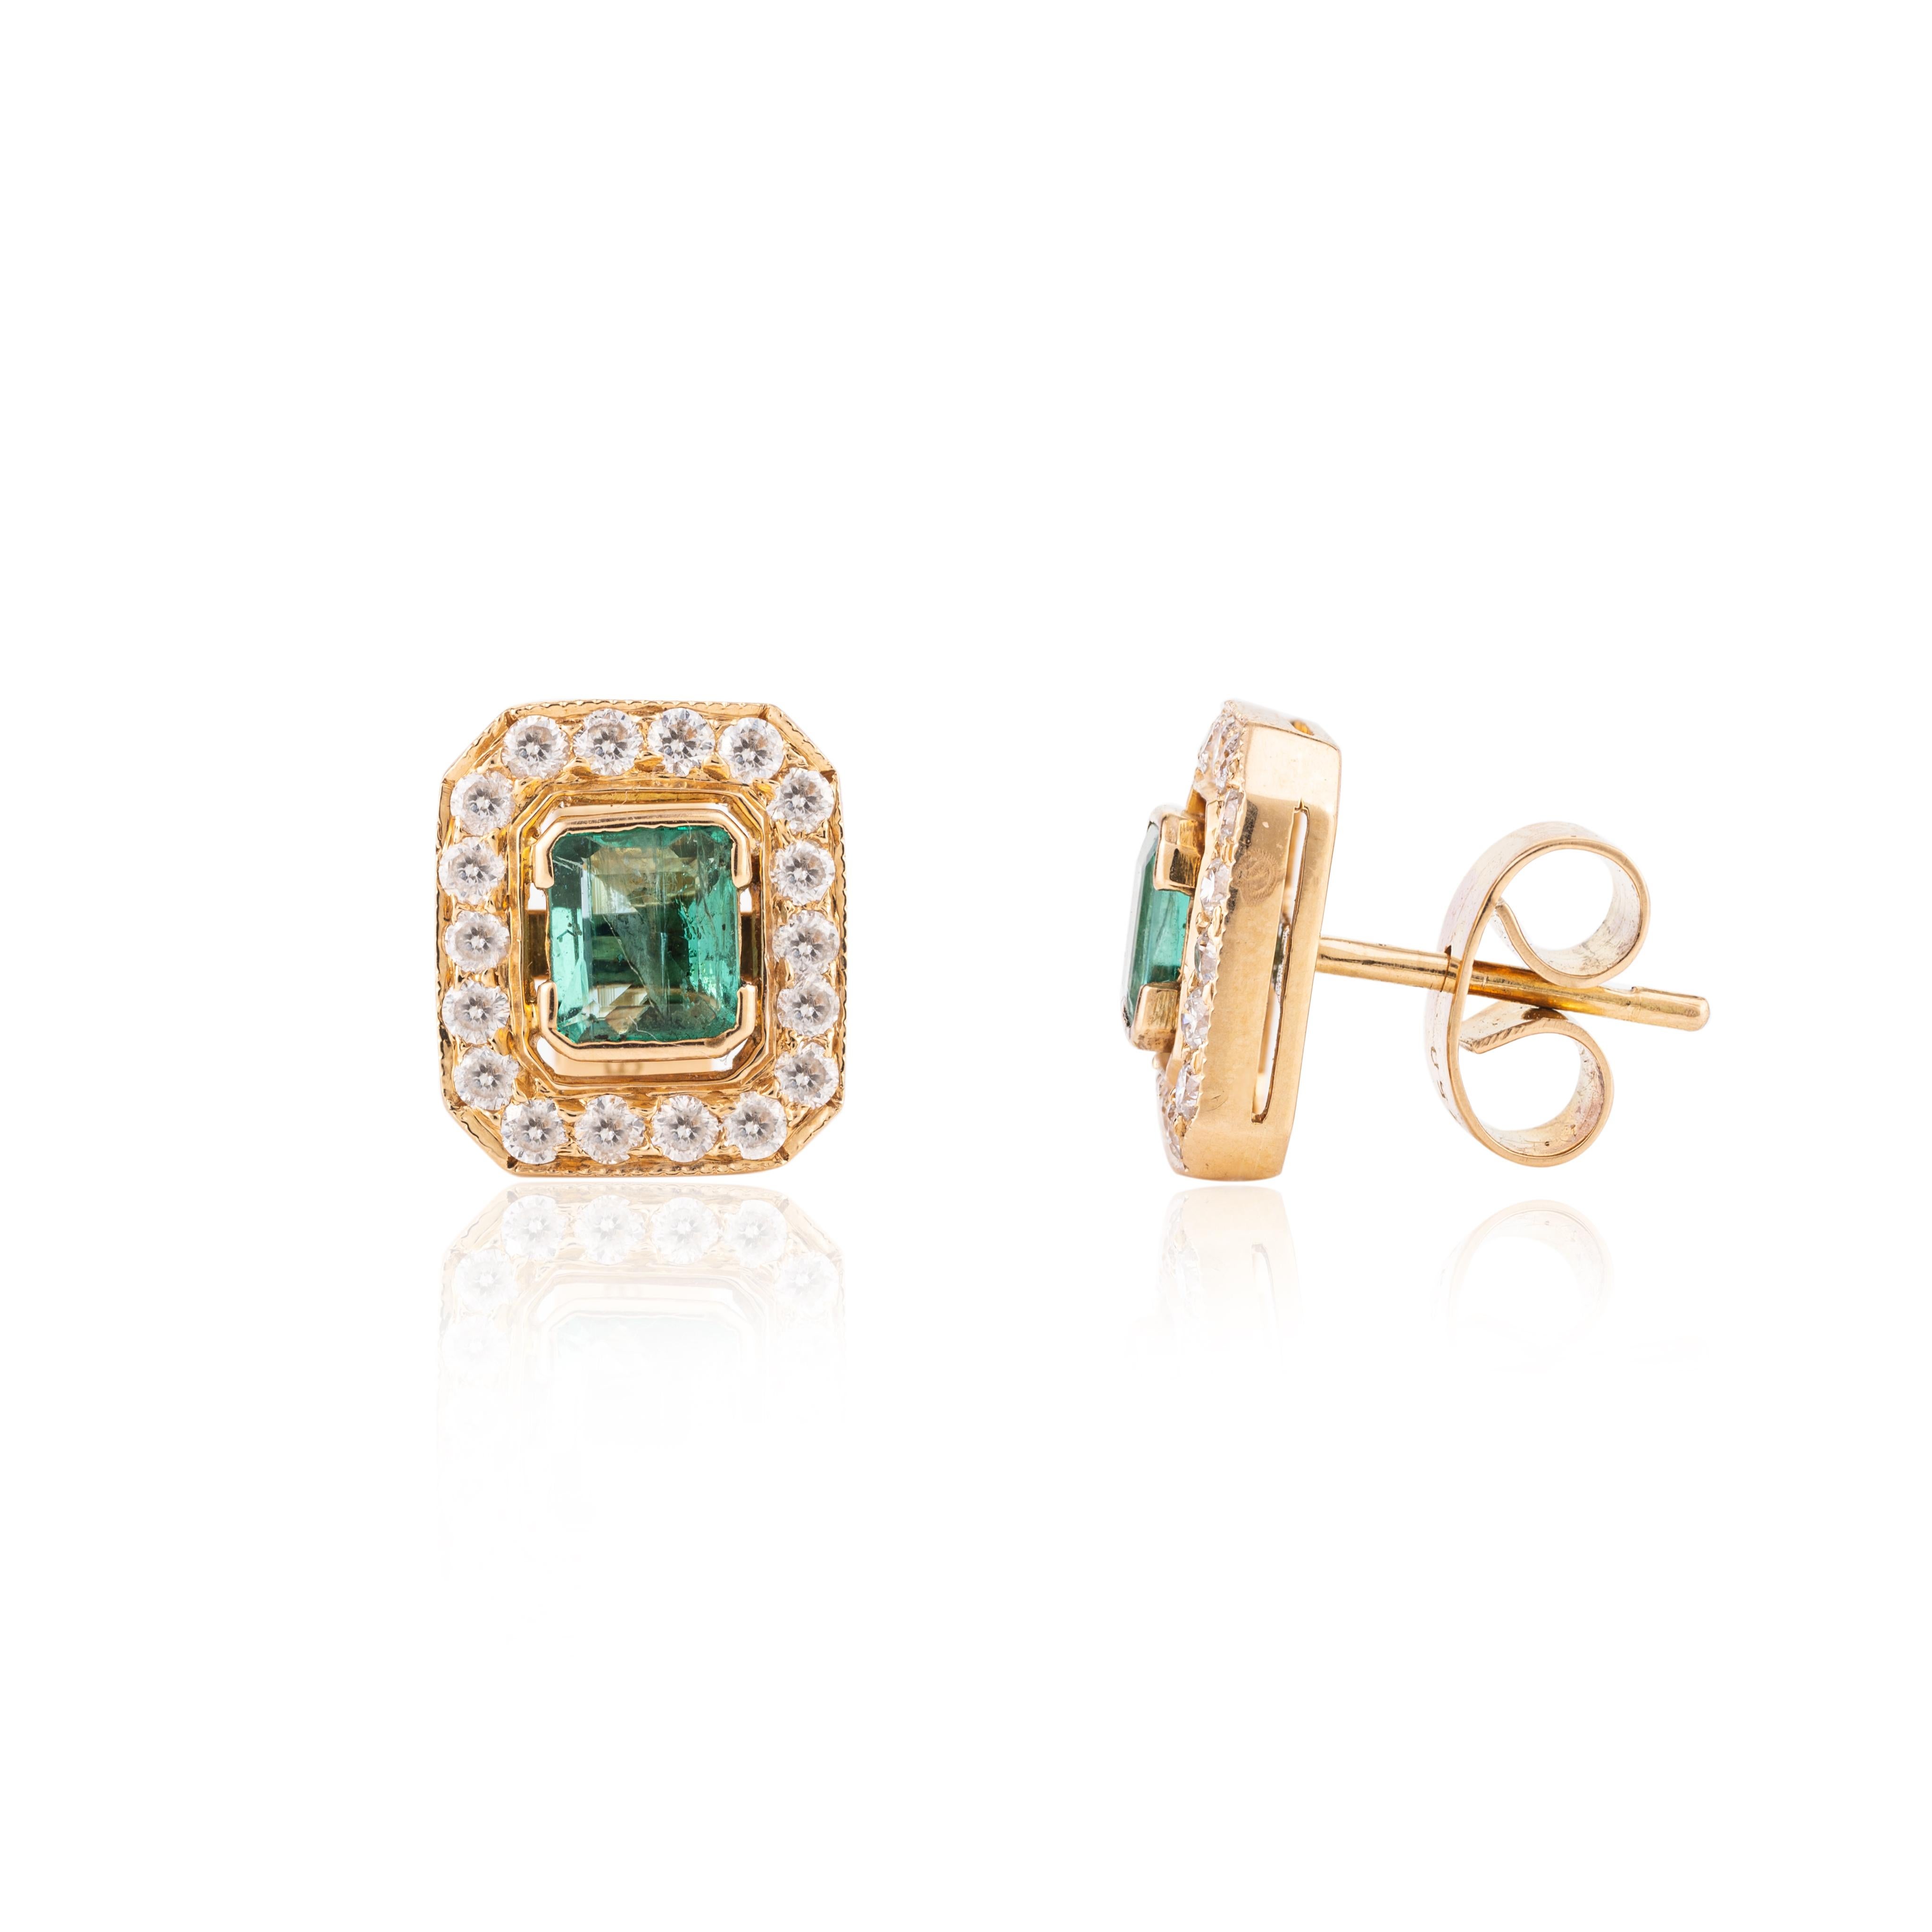 Women's Octagon Cut Emerald Halo Diamond Big Stud Earrings in 18k Yellow Gold for Her For Sale